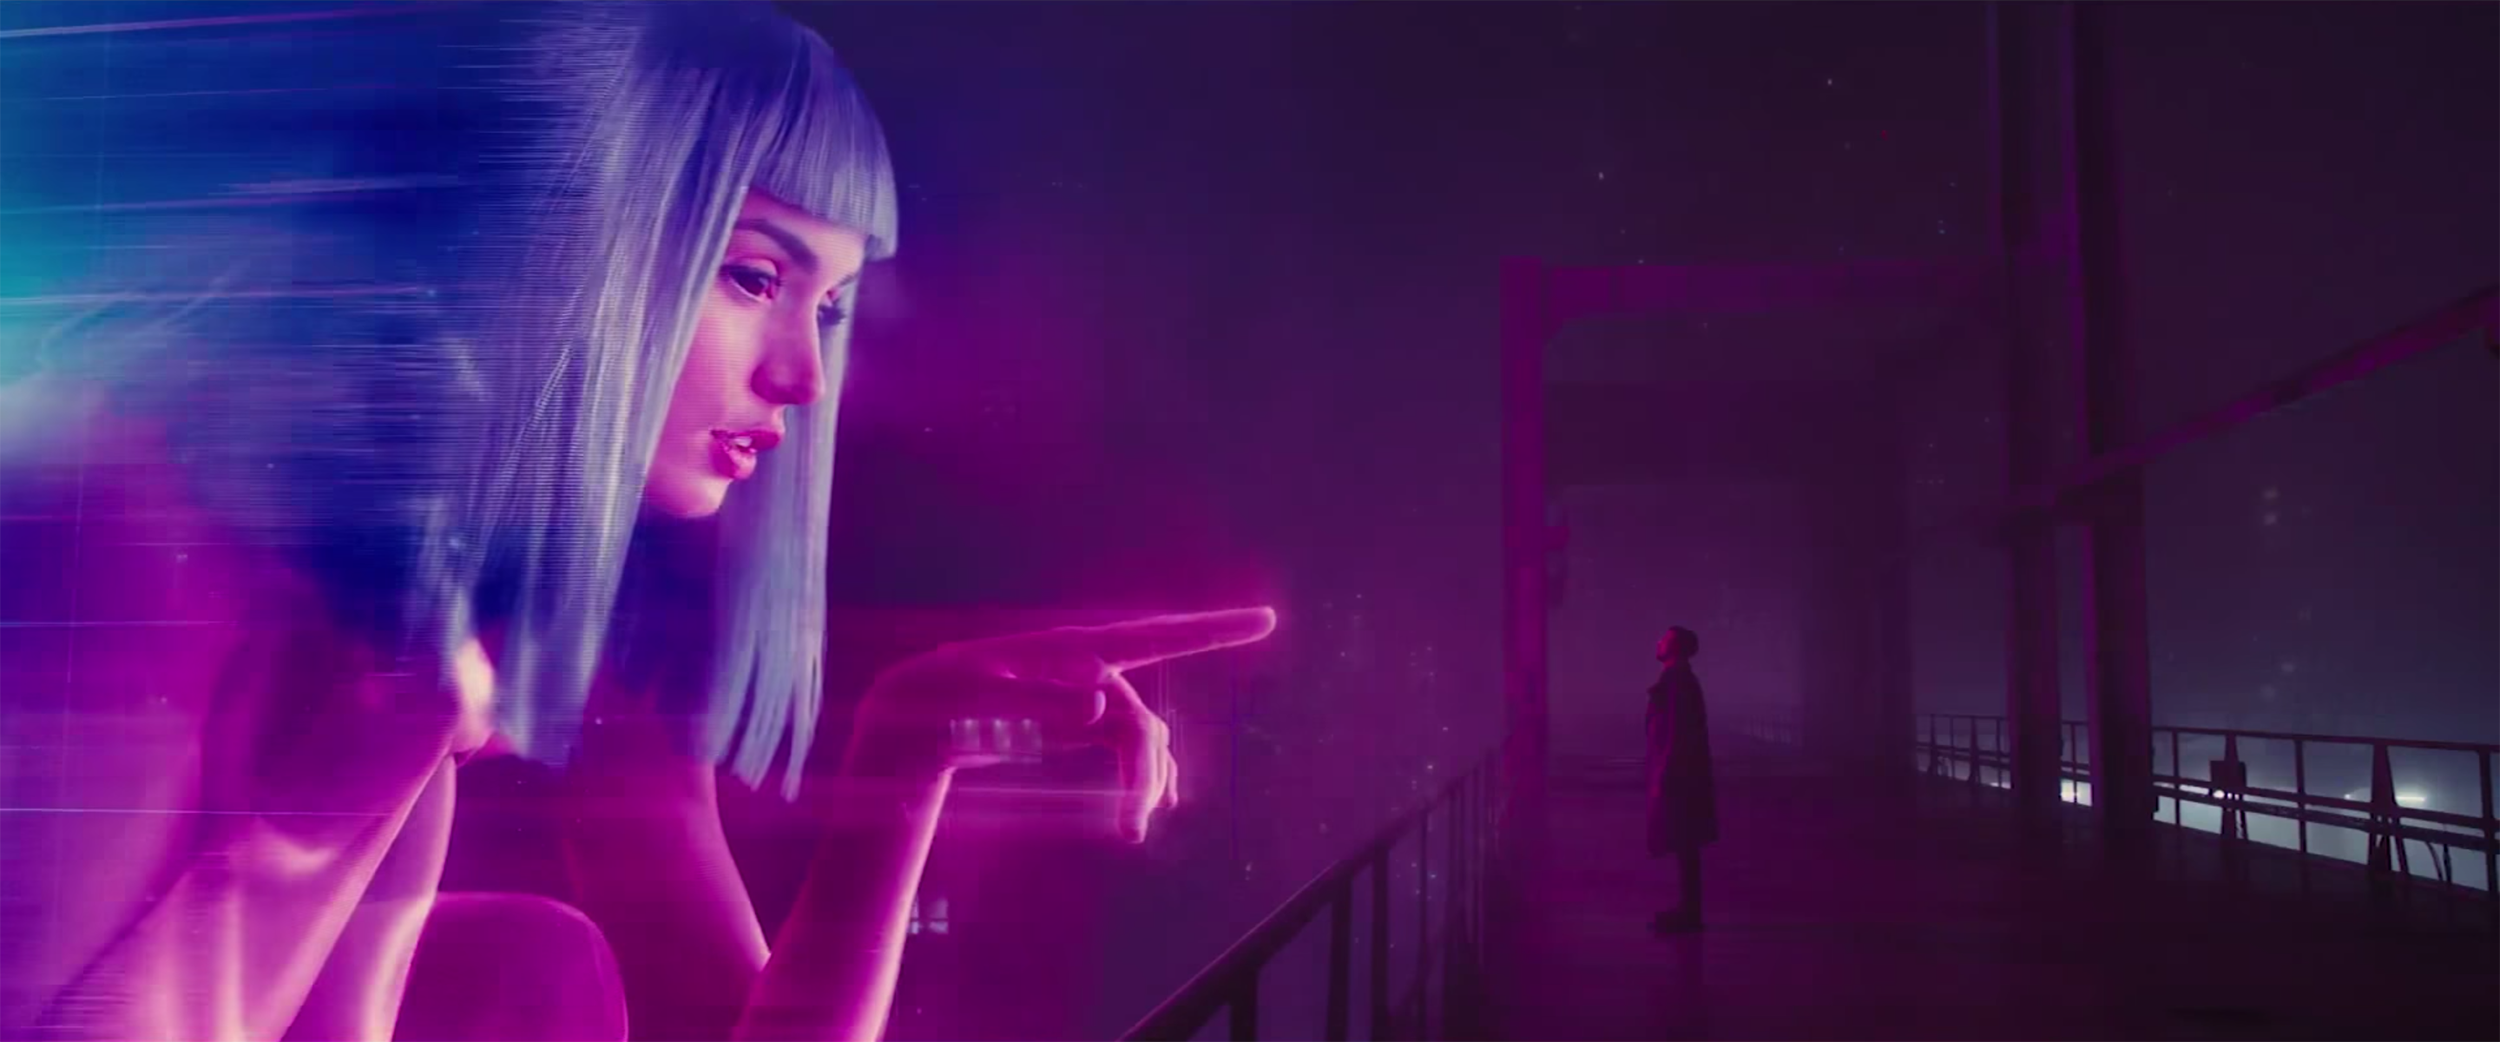 A Peak inside the Cinematography of Blade Runner 2049